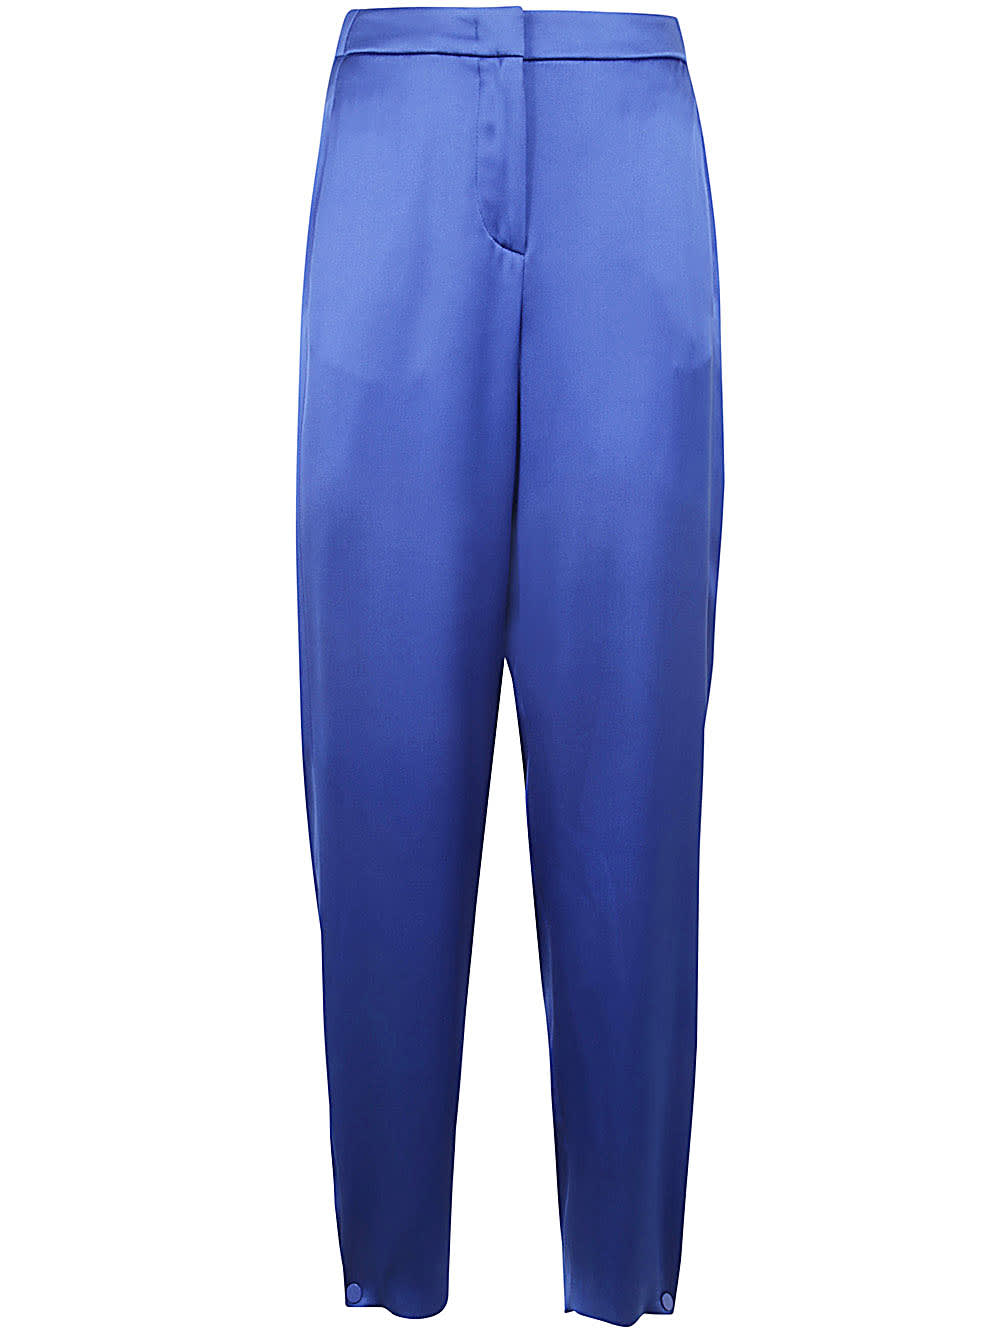 Shop Giorgio Armani Elastic Waist Pants With Button On Bottom In Ubpa Bluette